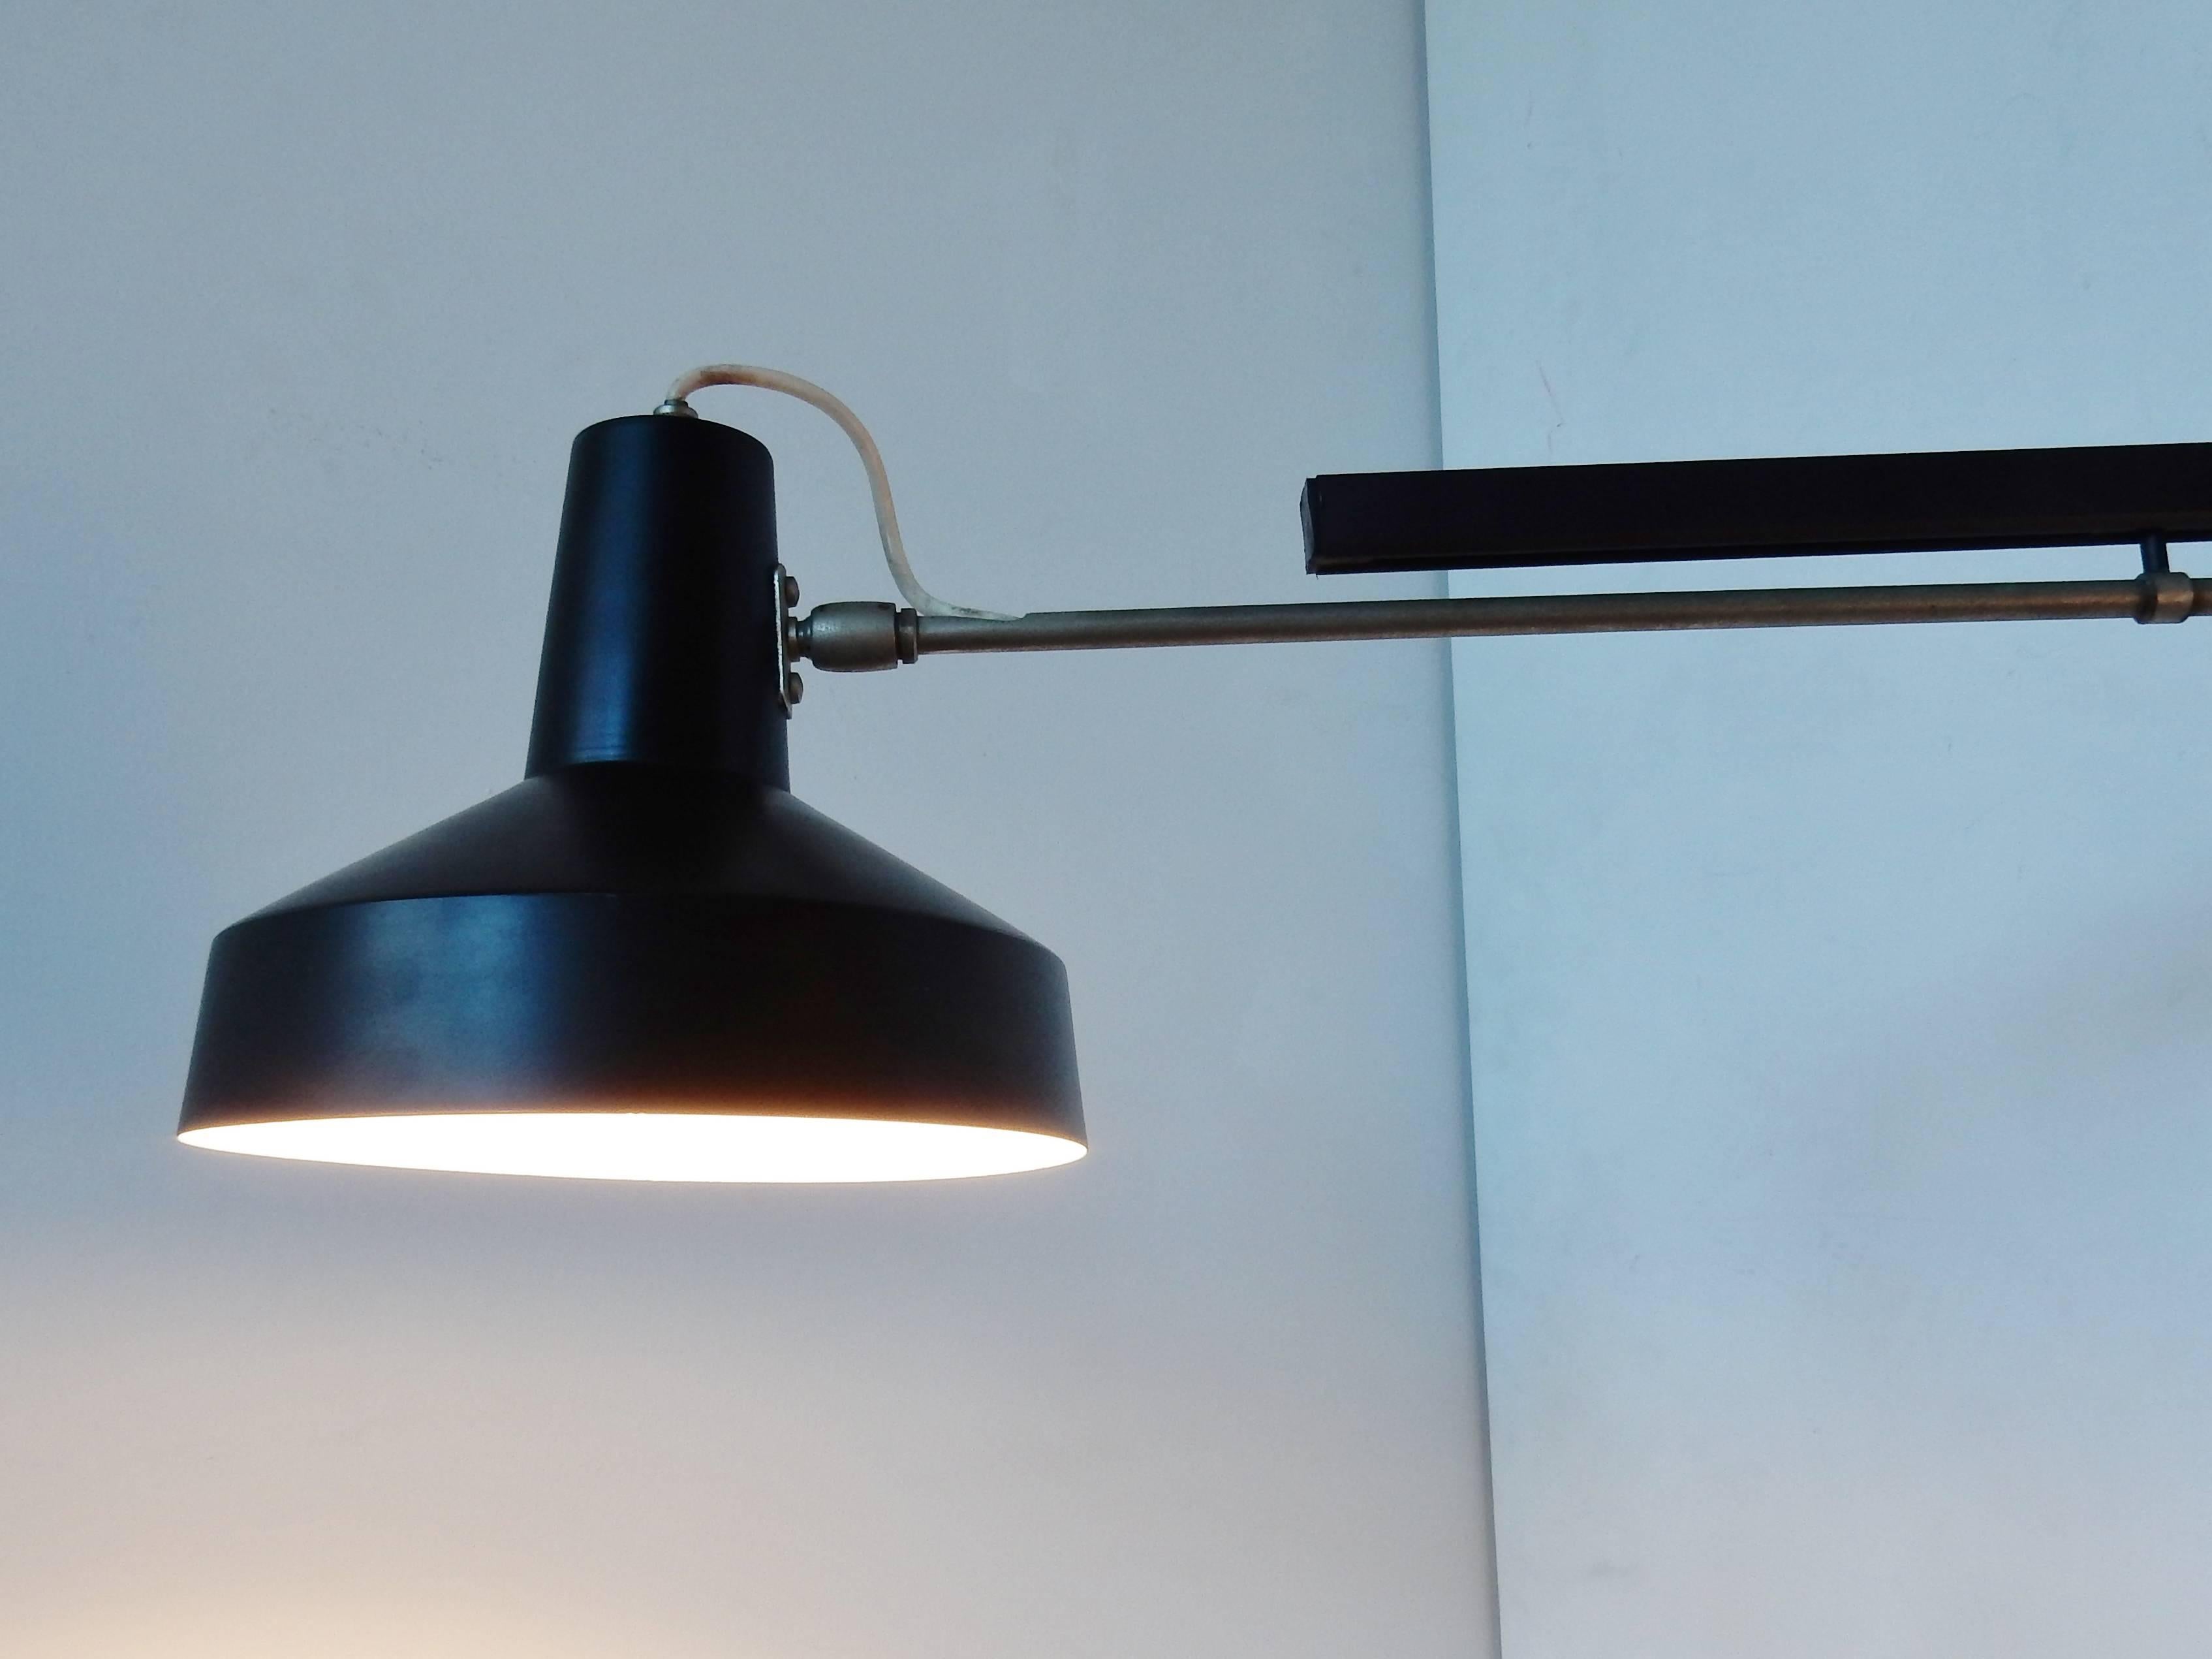 Mid-Century Modern Black Telescopic Wall Lamp by Hiemstra Evolux Dutch Design, Netherlands, 1960s For Sale